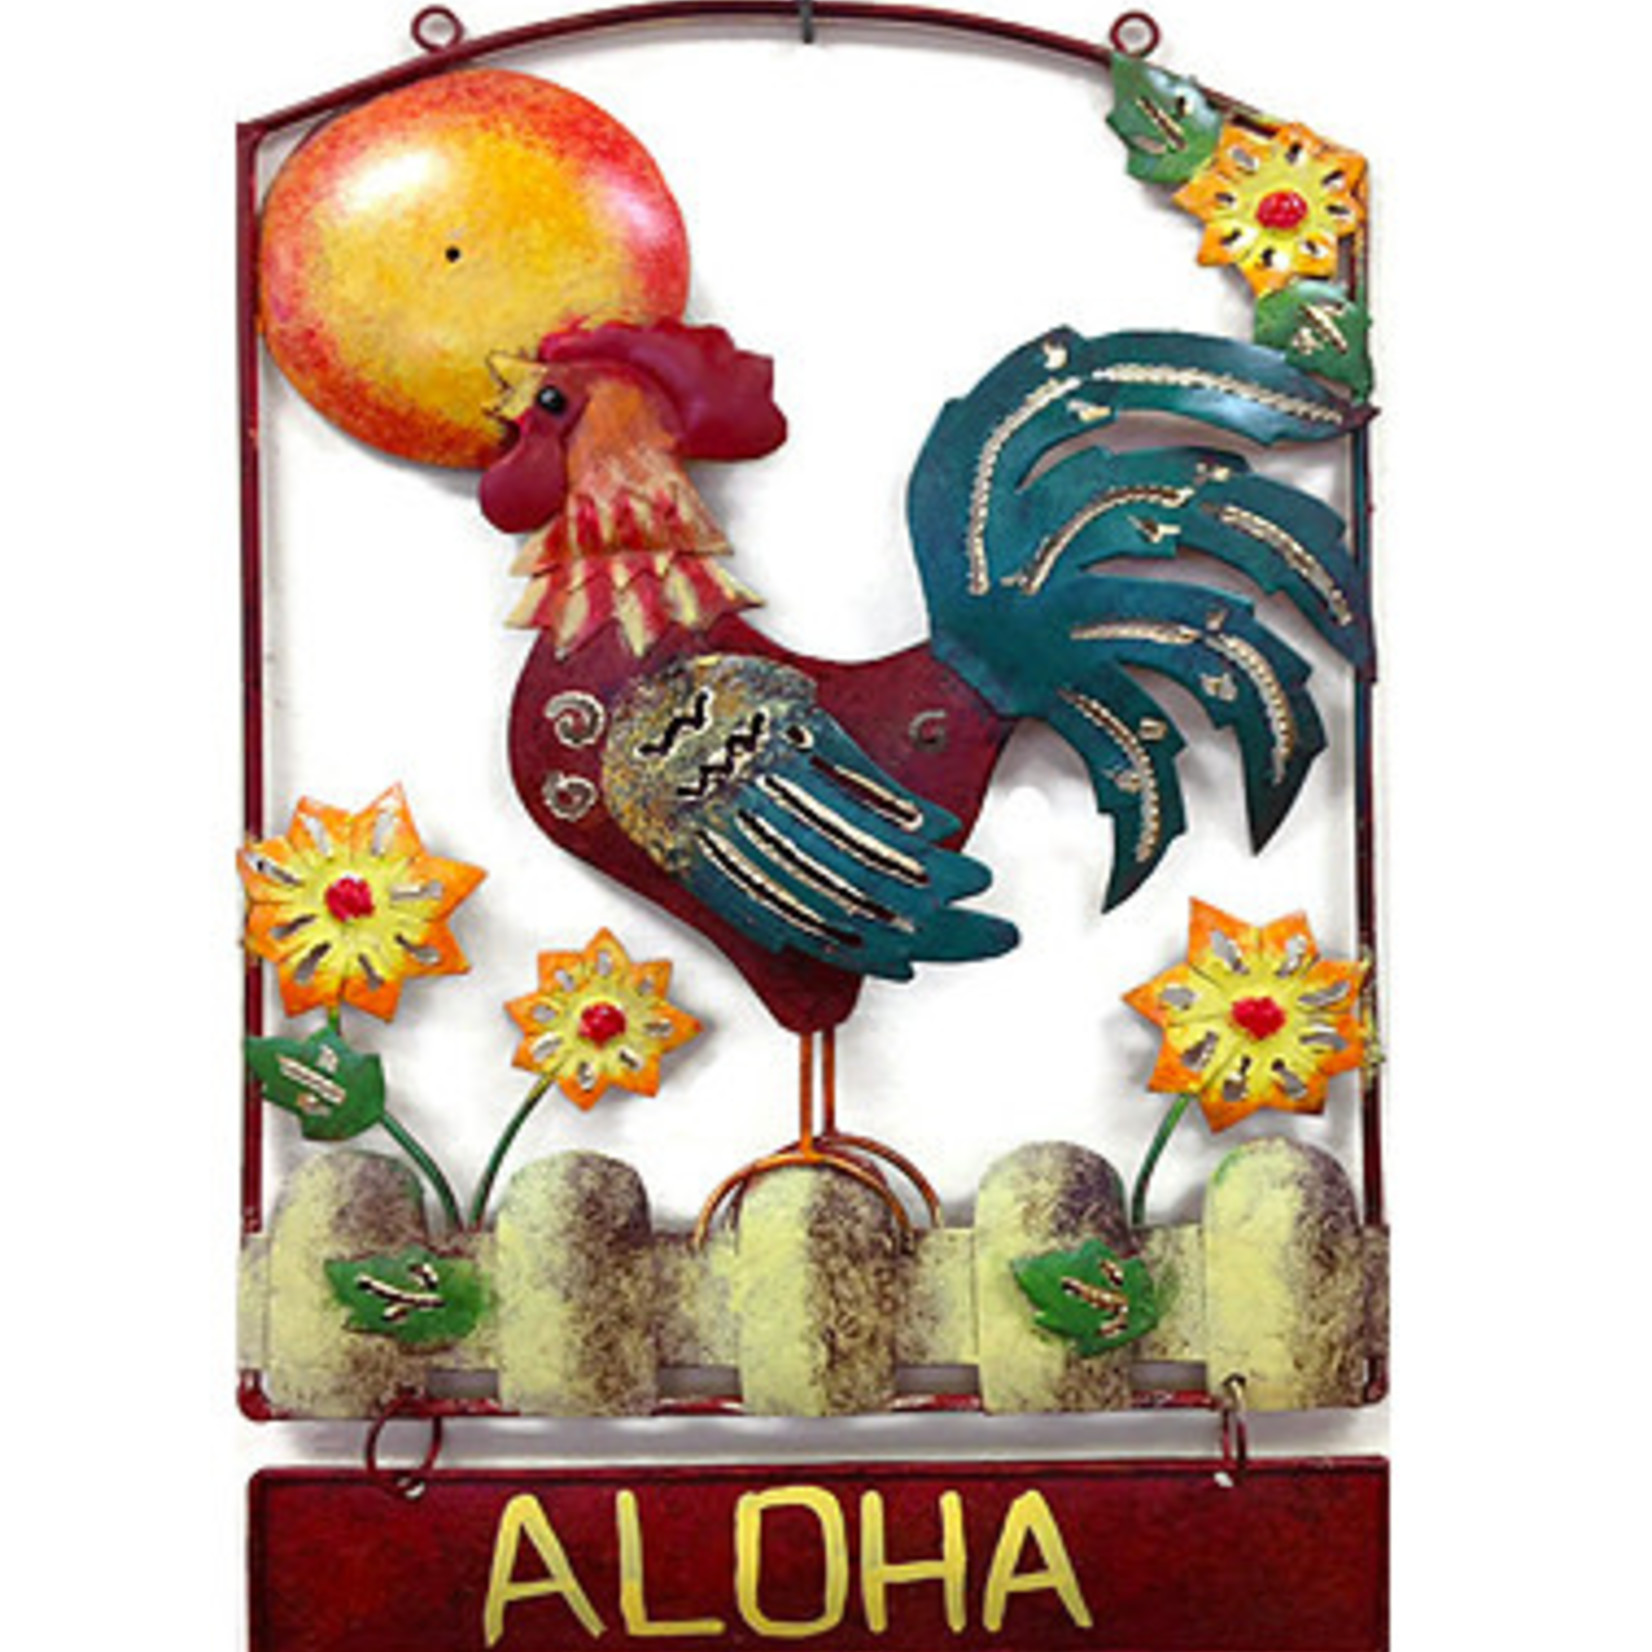 Handmade and Painted Iron Rooster Aloha Sign with Sun